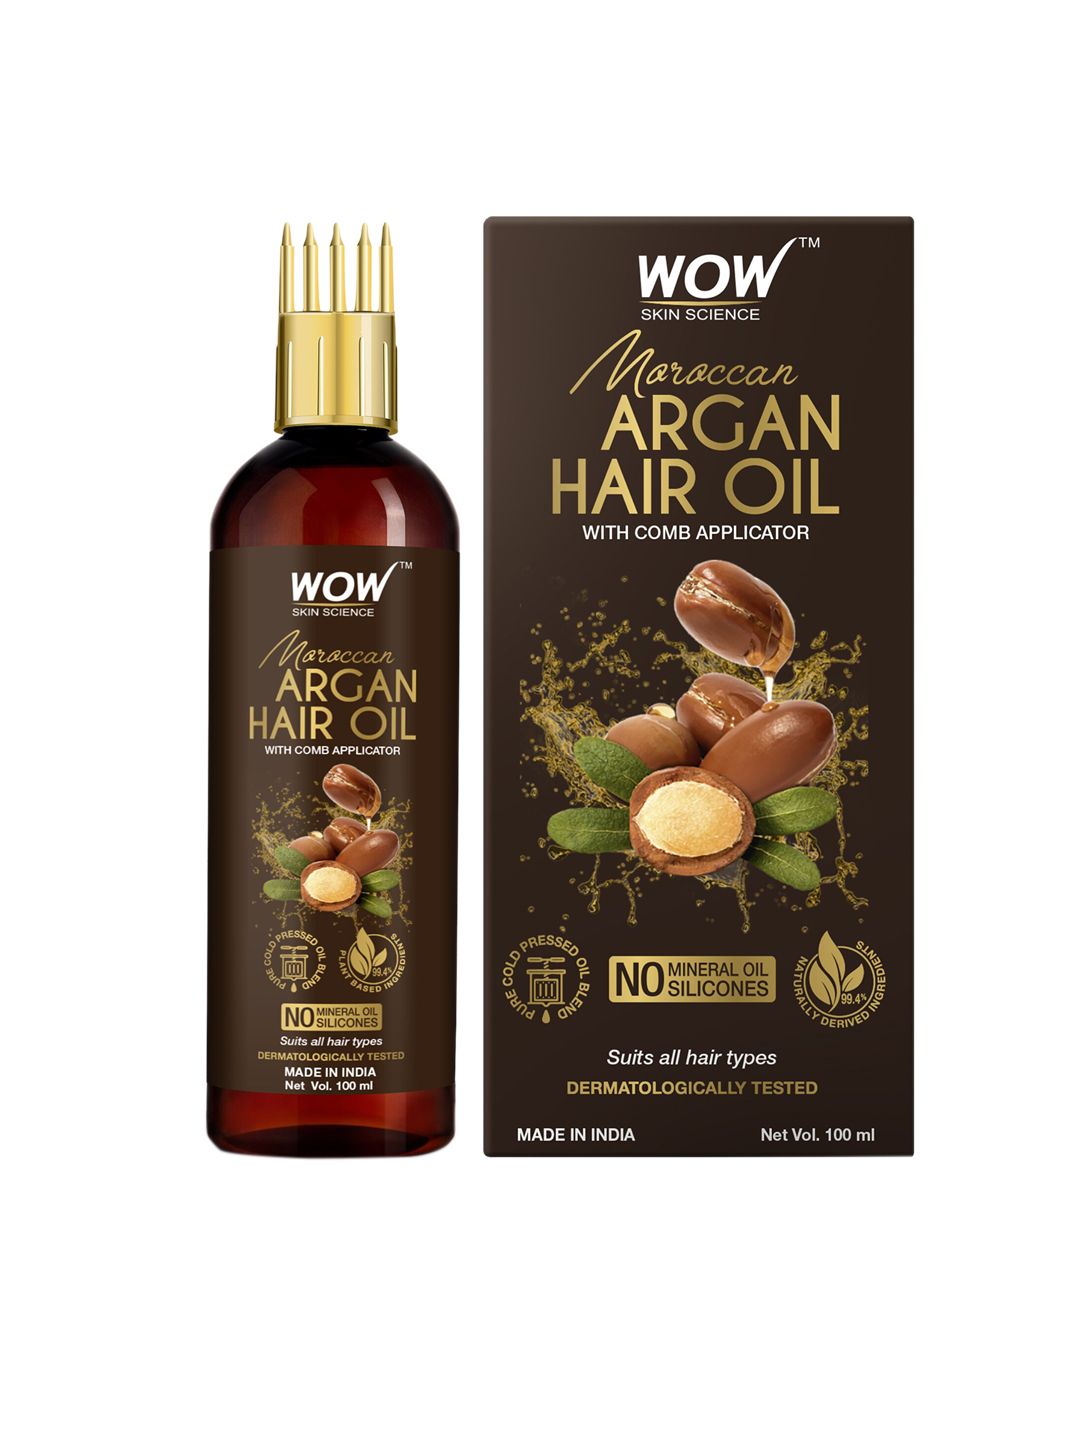 WOW SKIN SCIENCE Cold Pressed Moroccan Argan Hair Oil with Comb Applicator - 100 ml Price in India